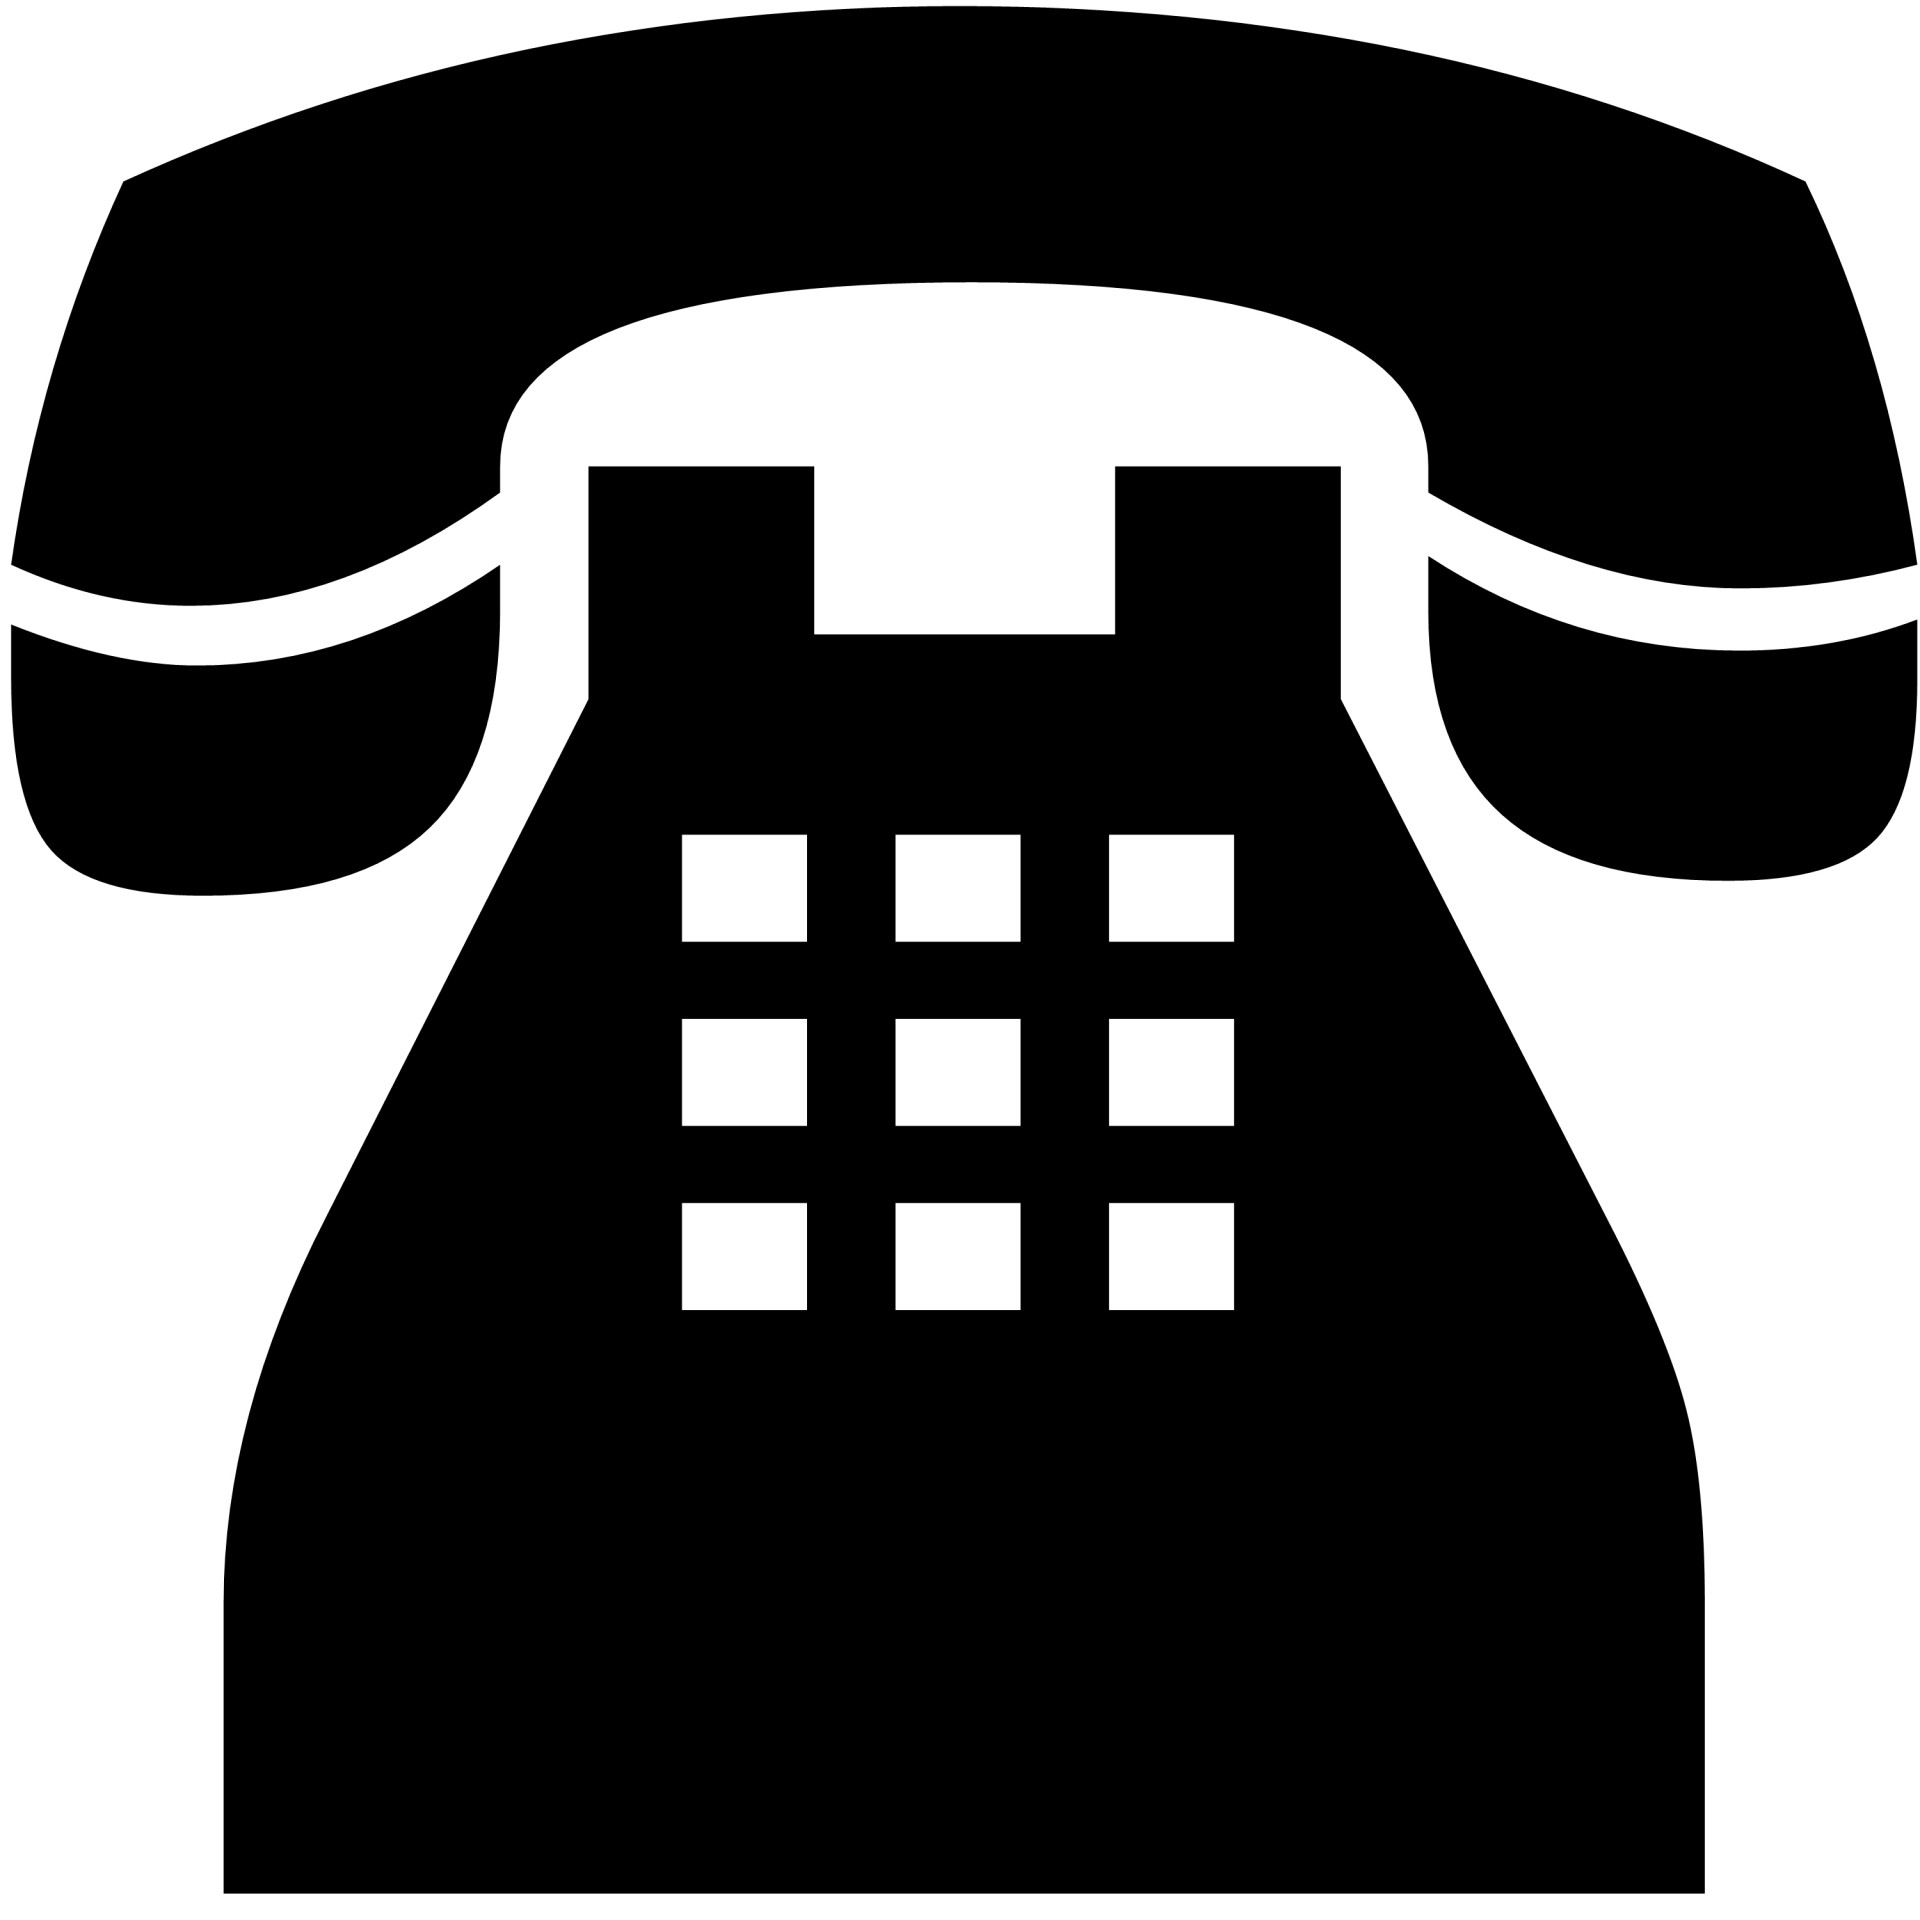 Telephone clipart silhouette #10